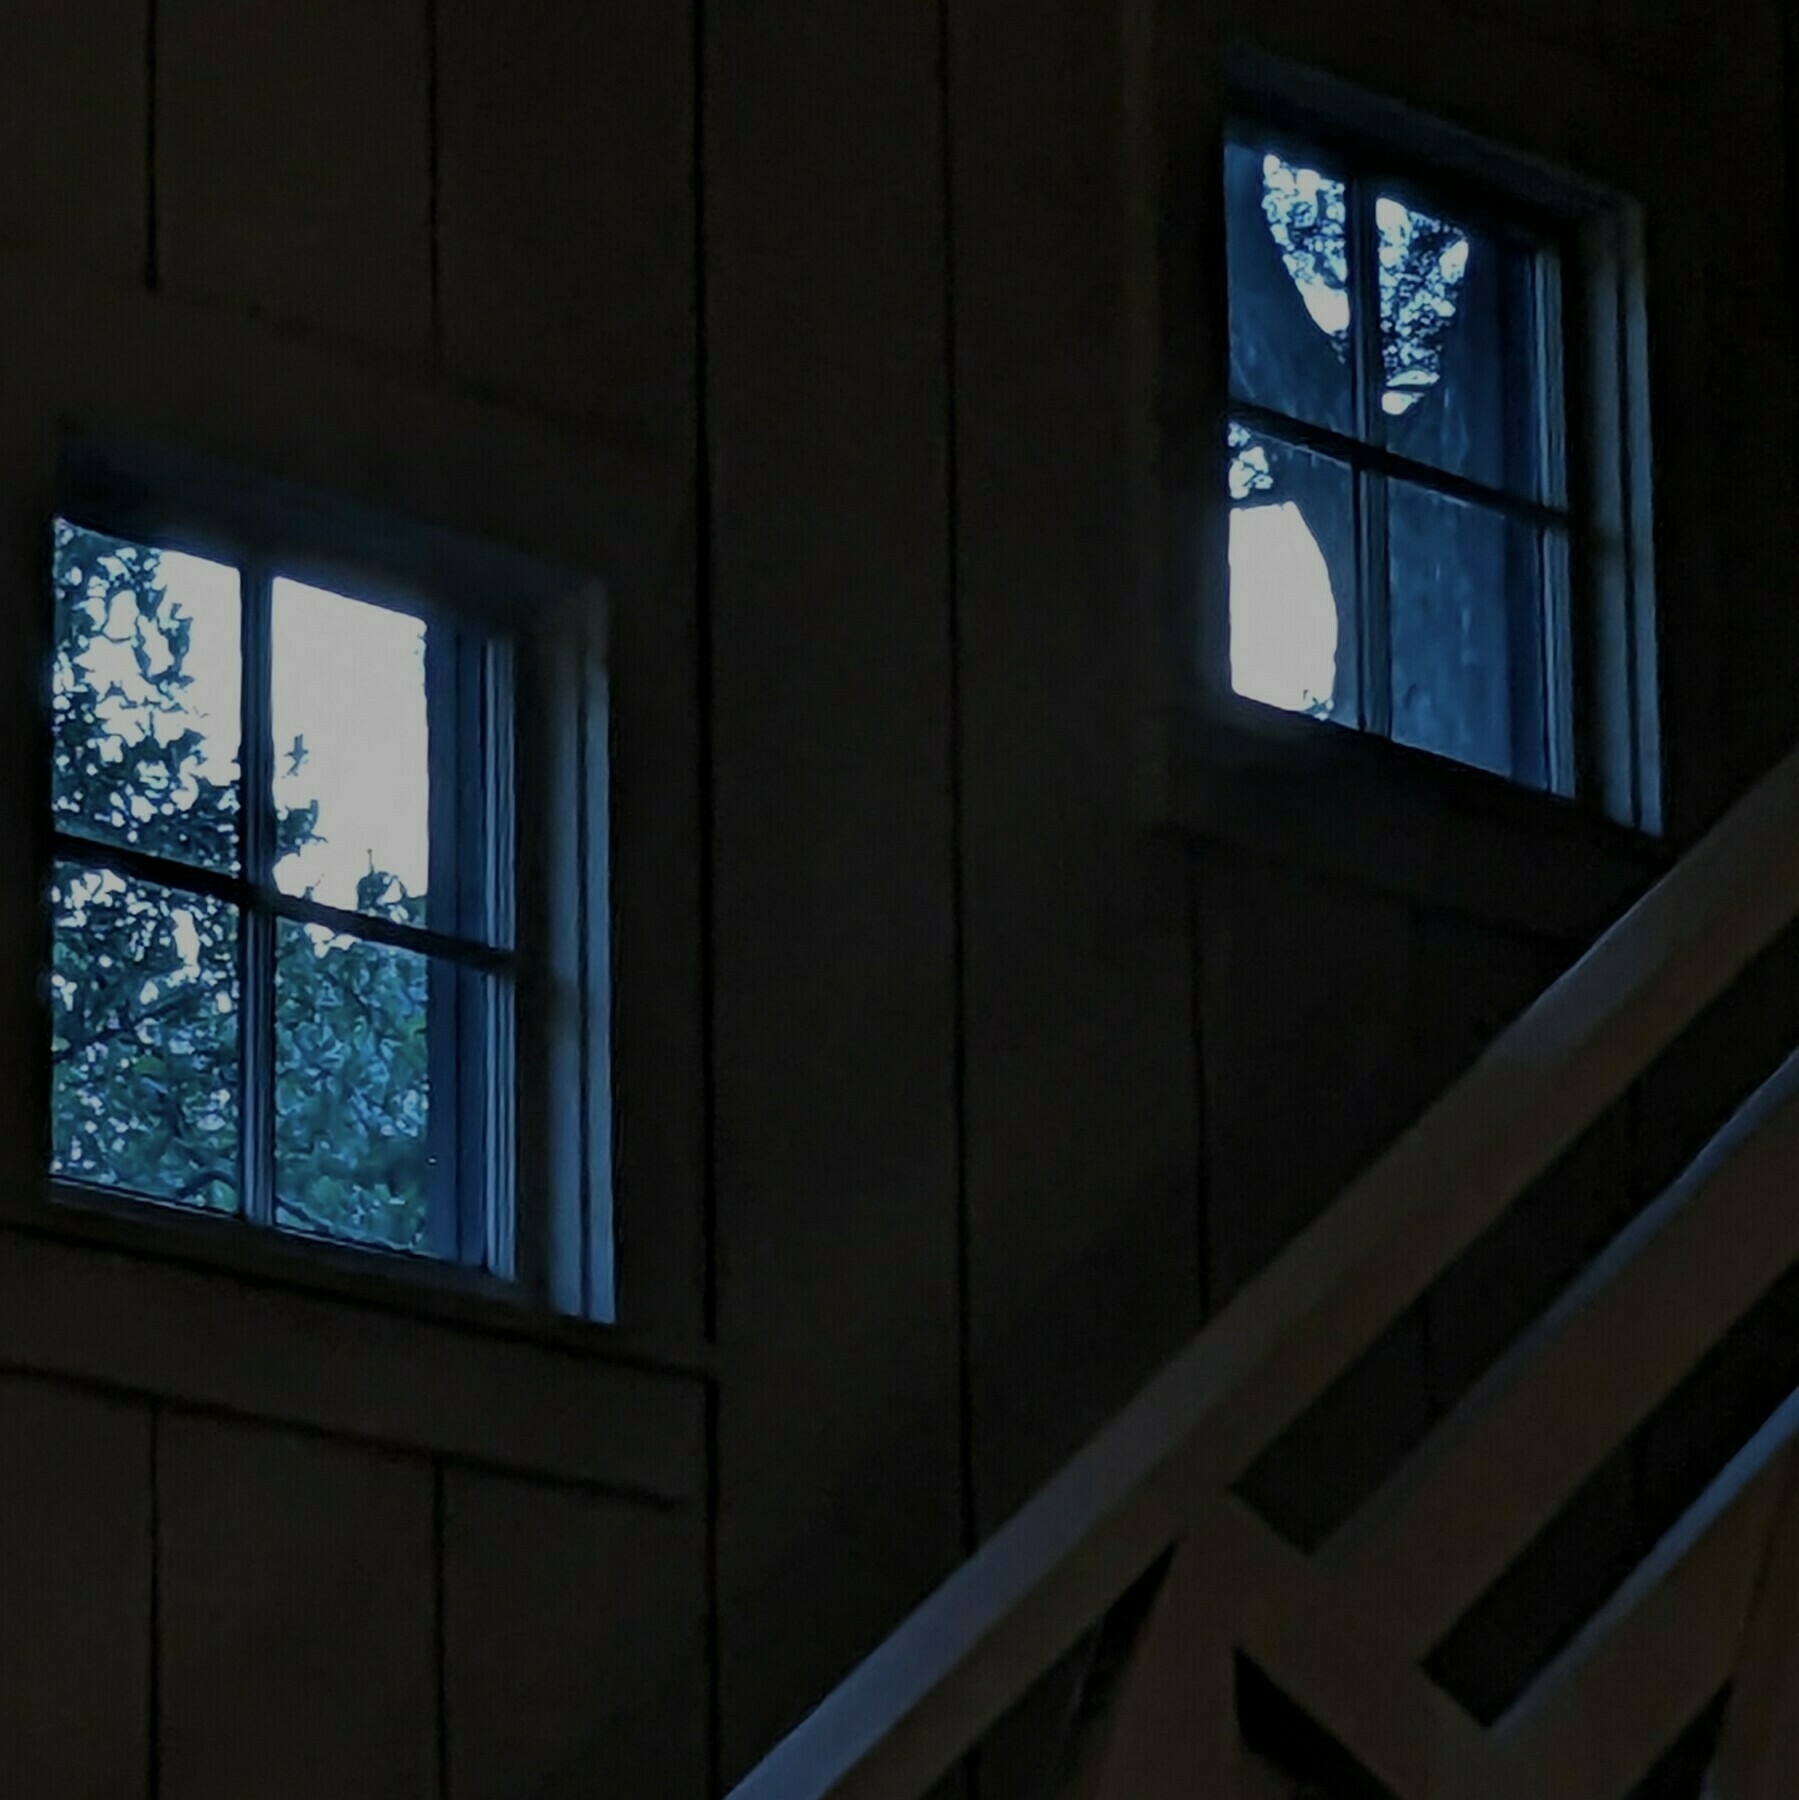 Two windows at dusk